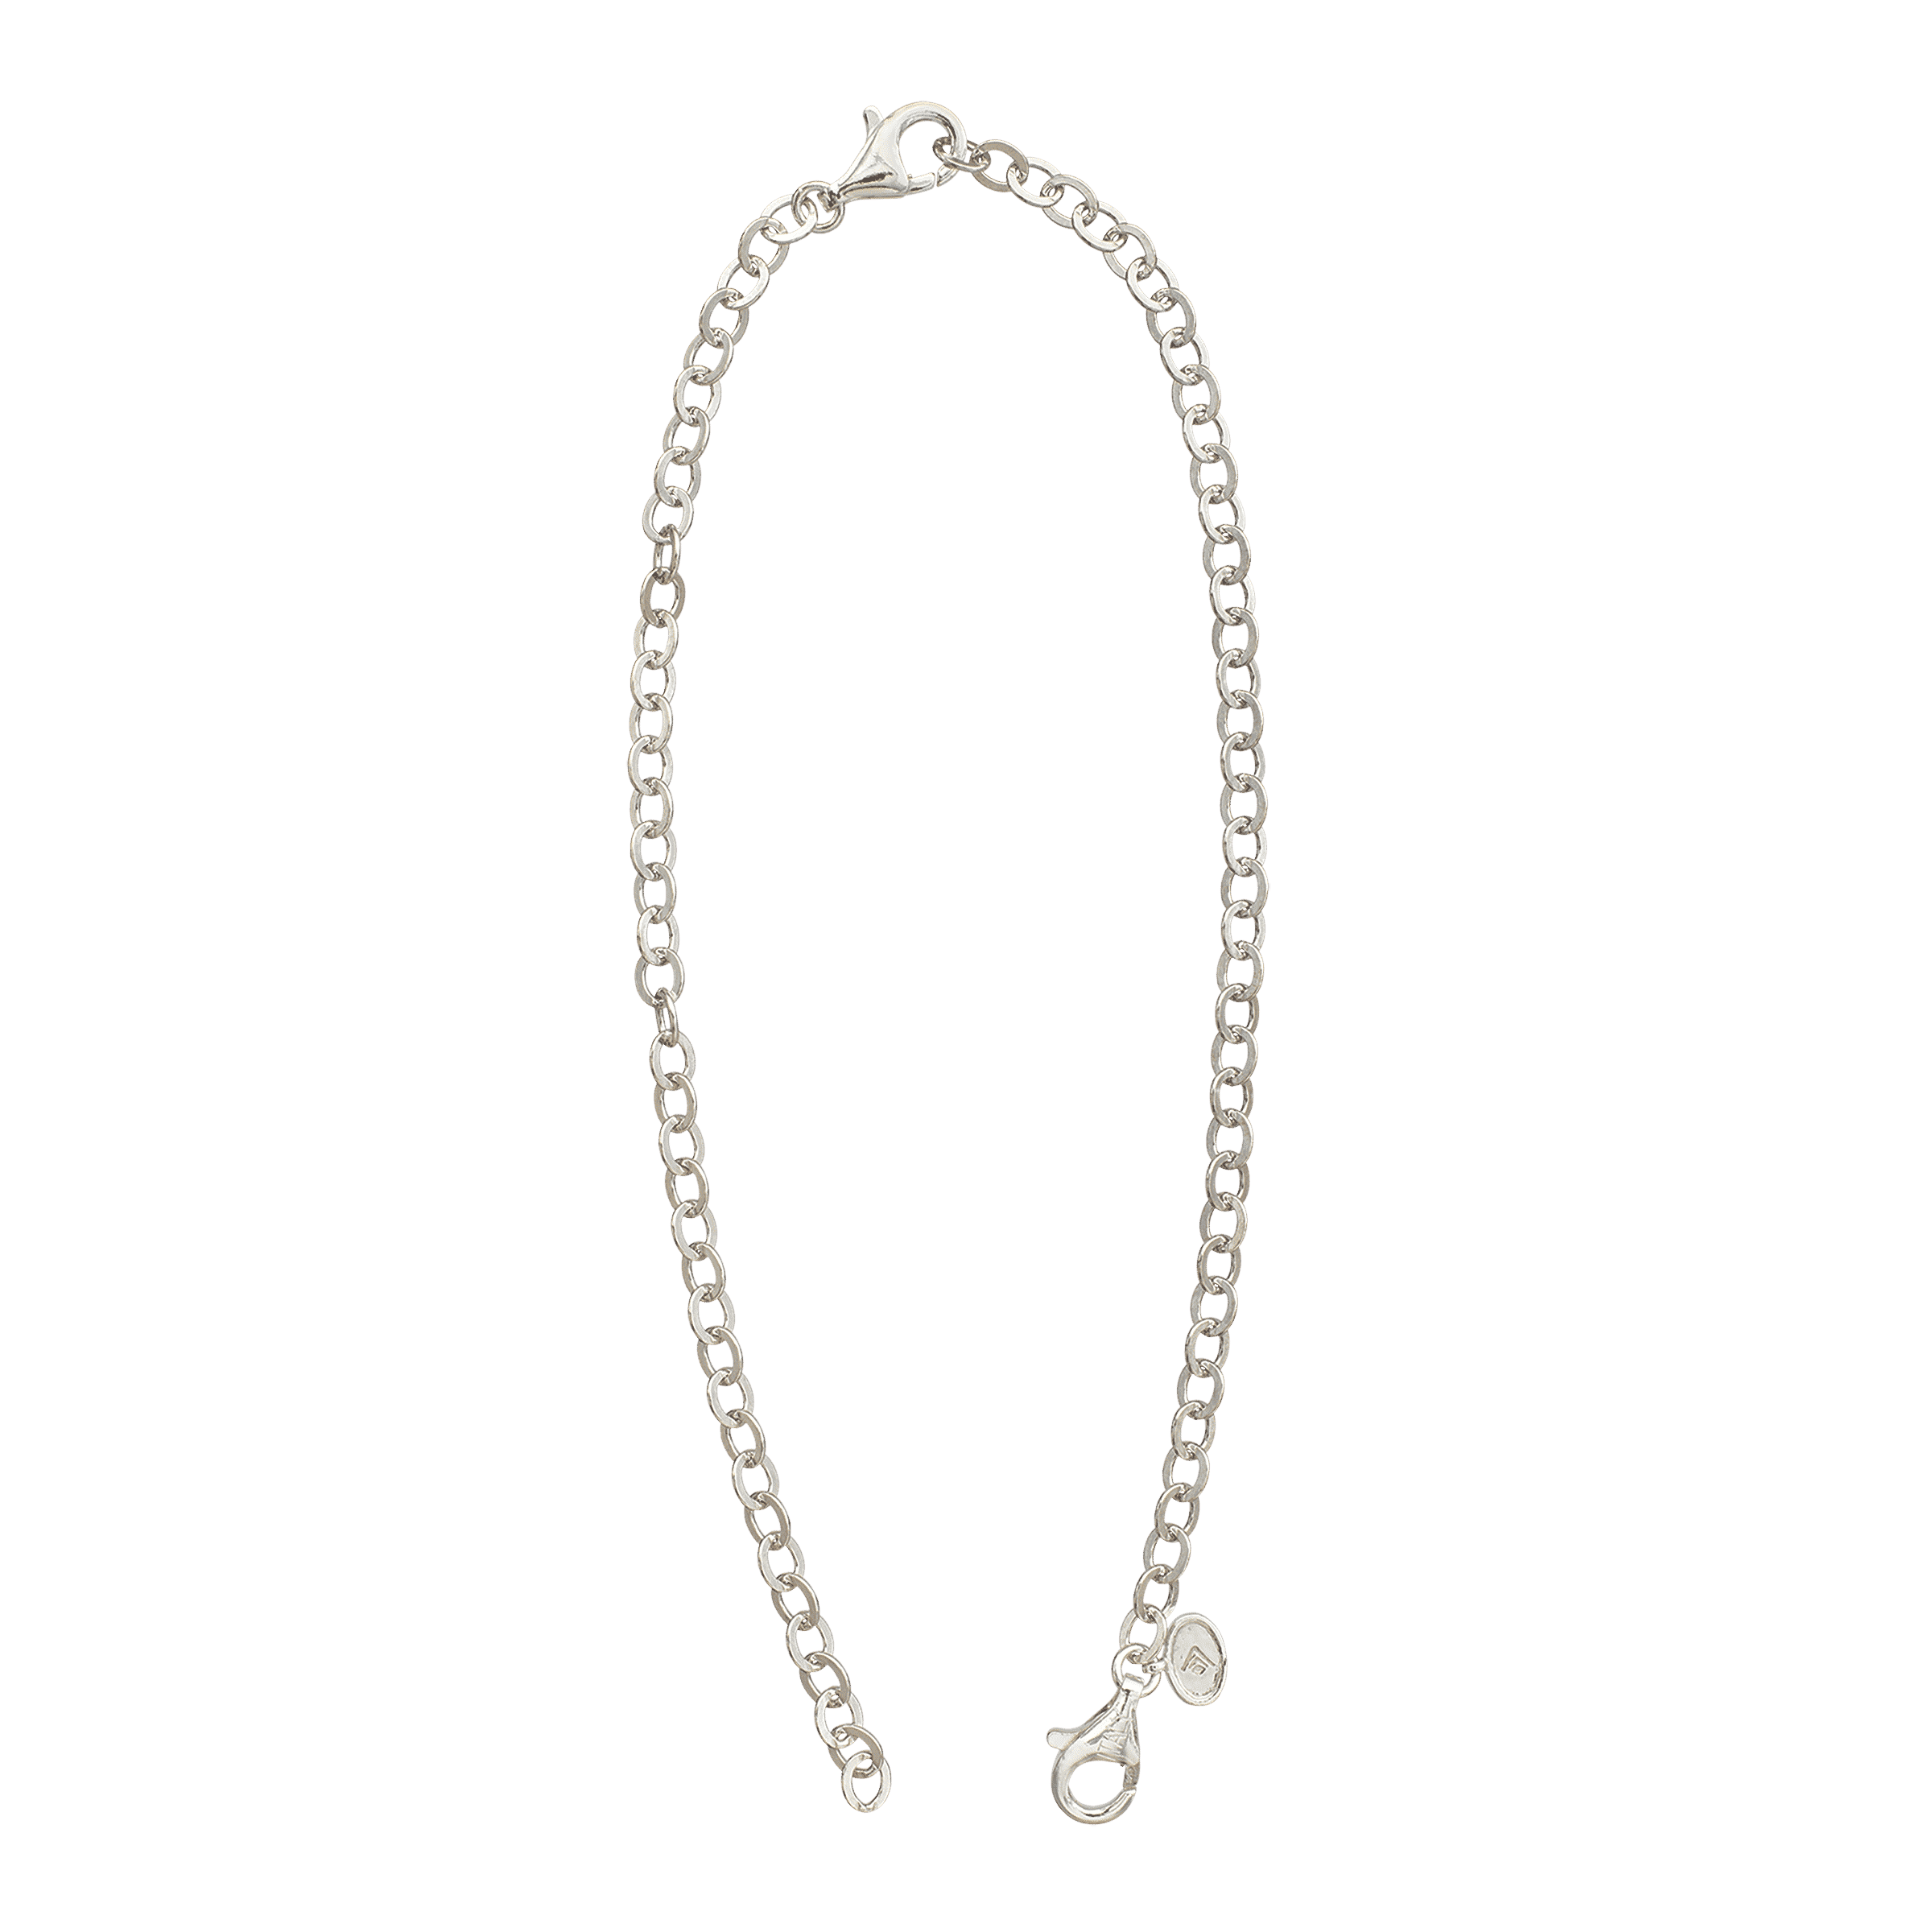 N1649 Silpada Sterling Silver Necklace Extender 3 long